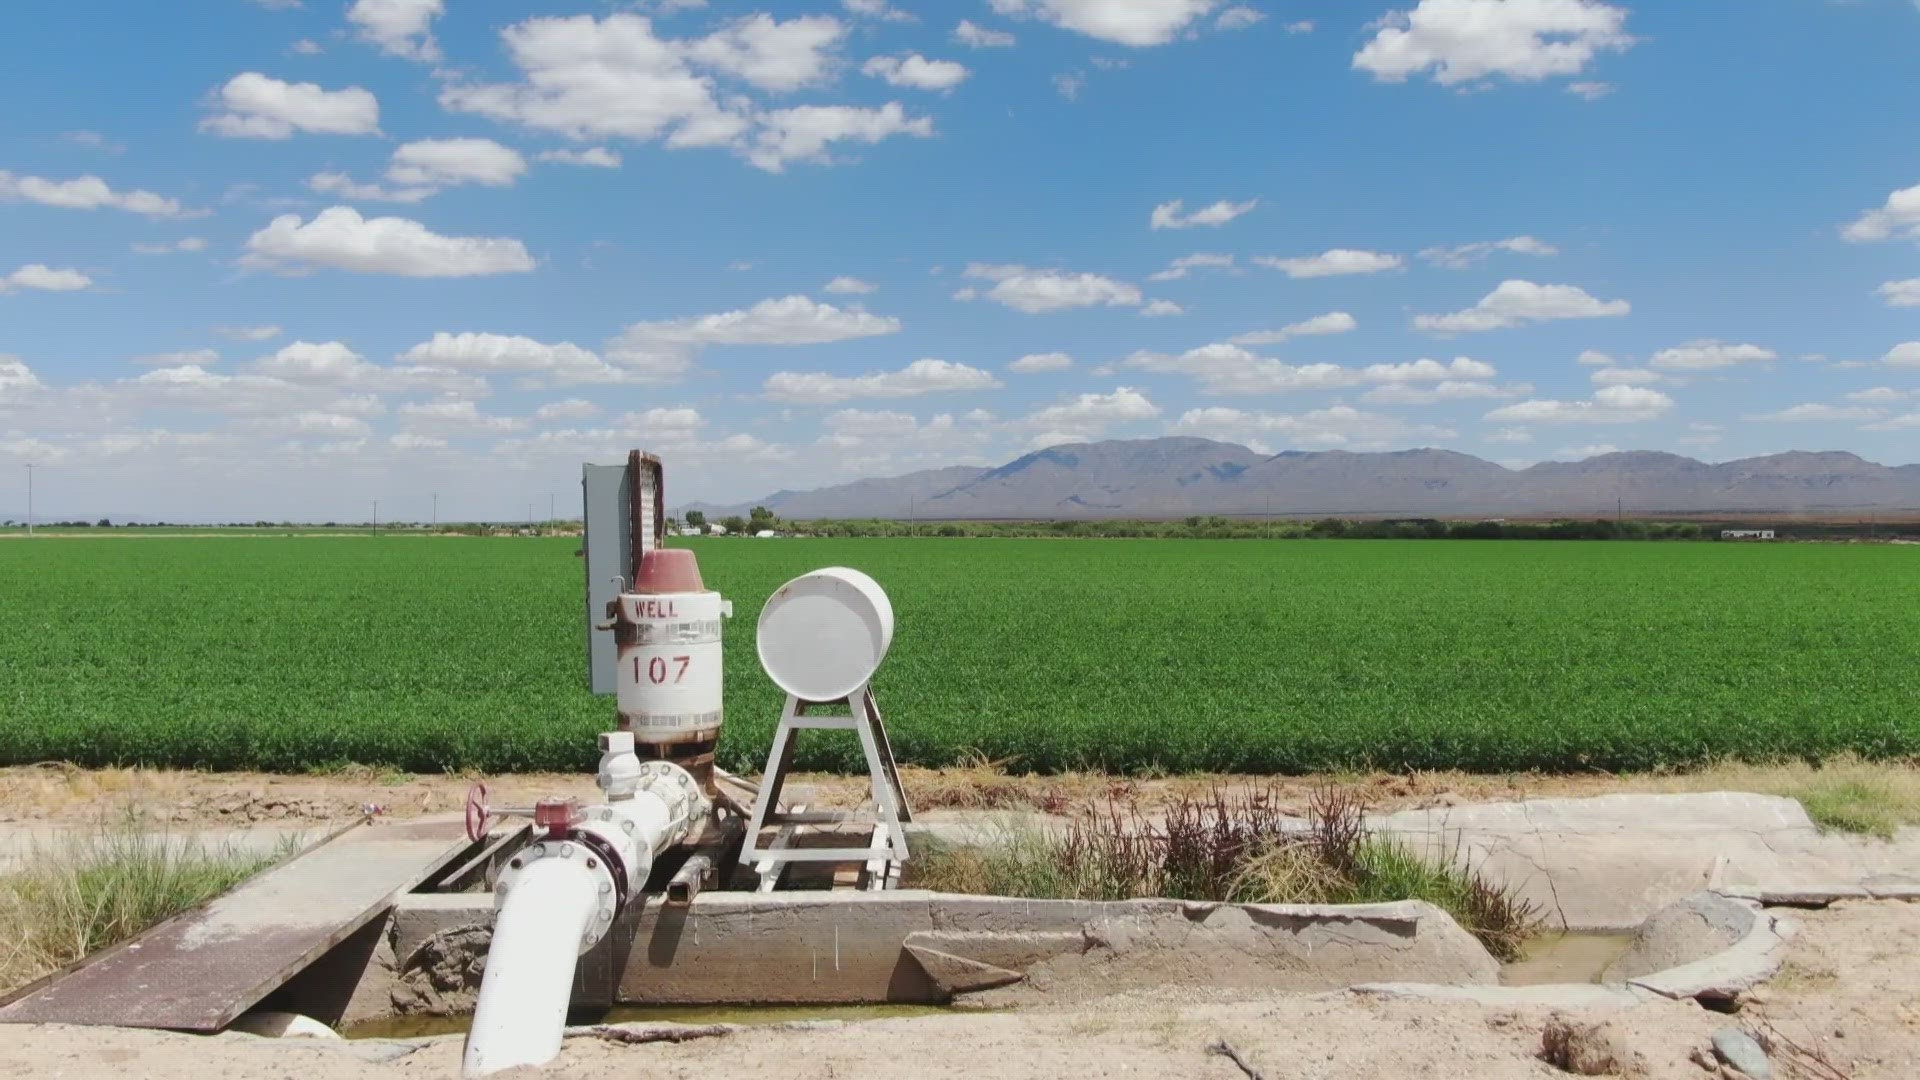 Parts of Arizona are sinking, mostly because of unrestricted groundwater pumping, experts say.